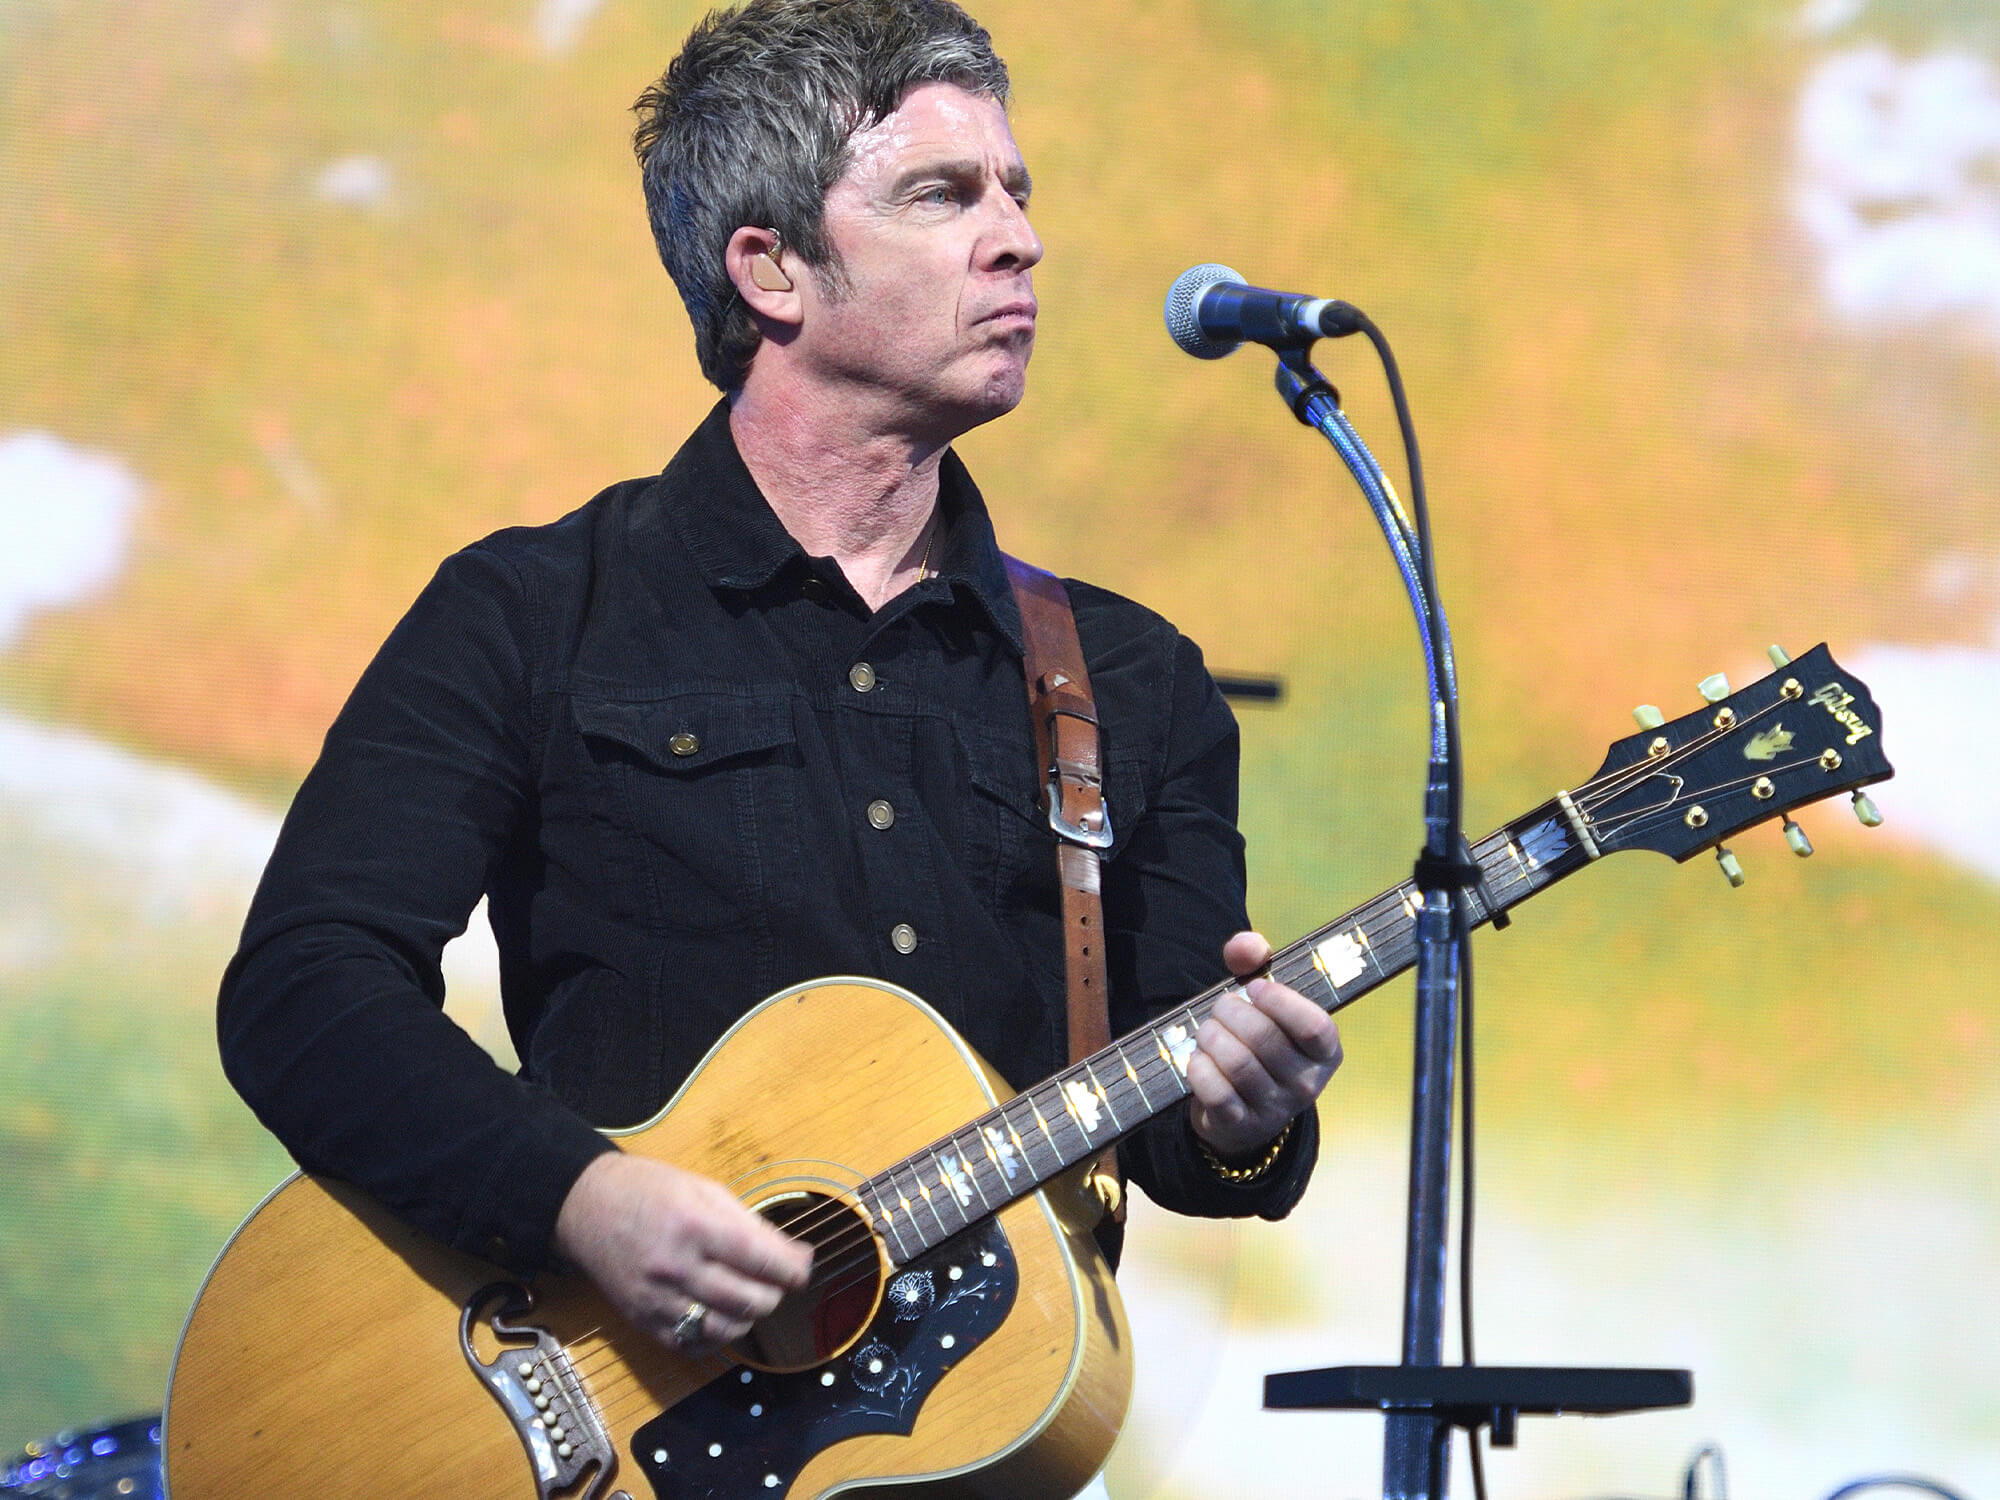 Noel Gallagher on stage playing a Gibson acoustic